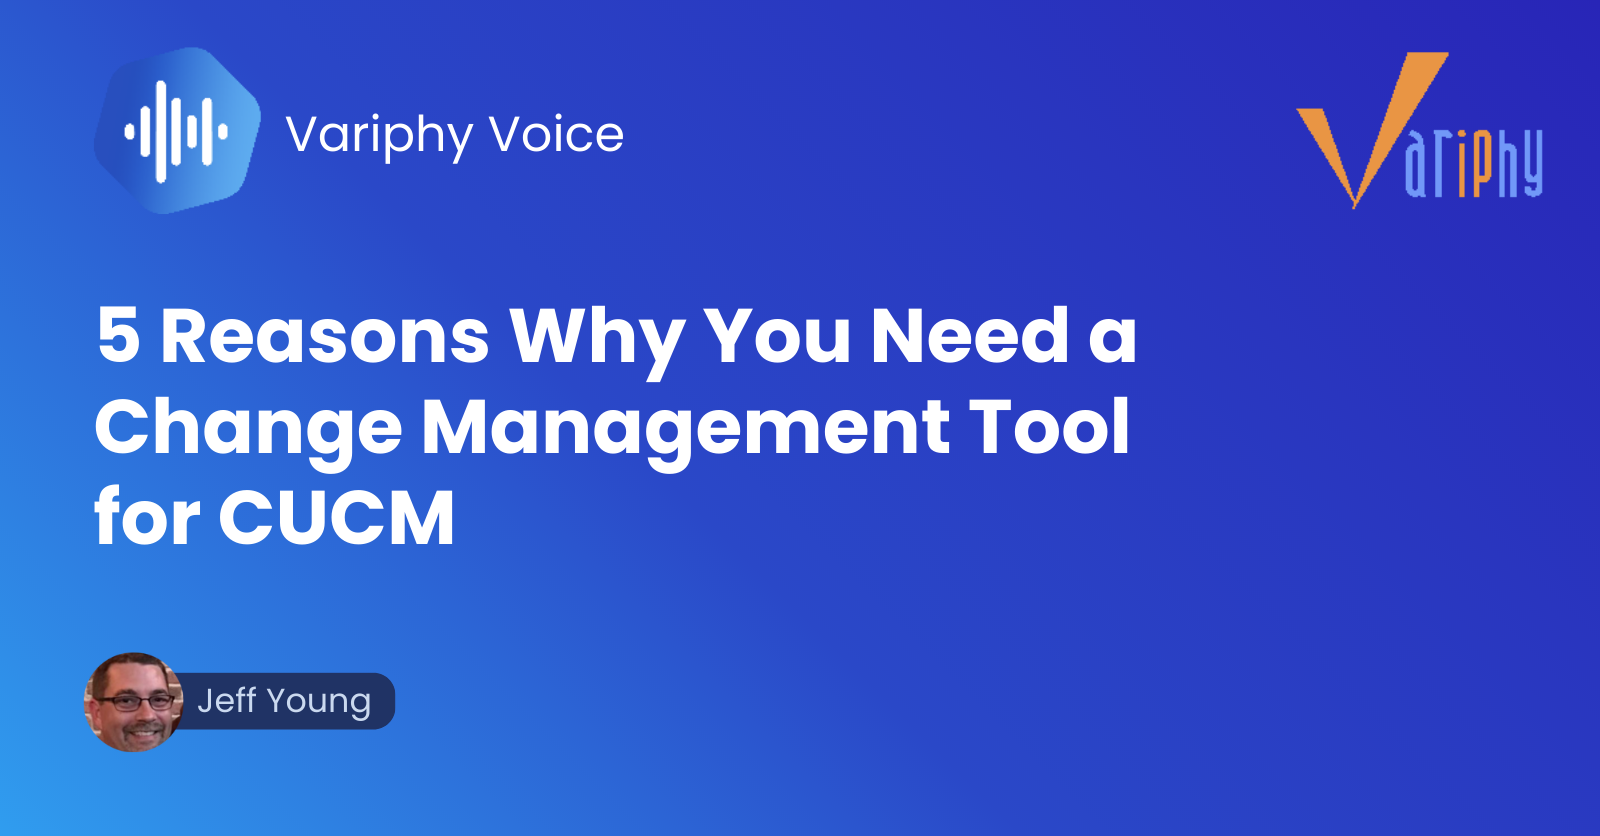 5 Reasons Why You Need a Change Management Tool for CUCM